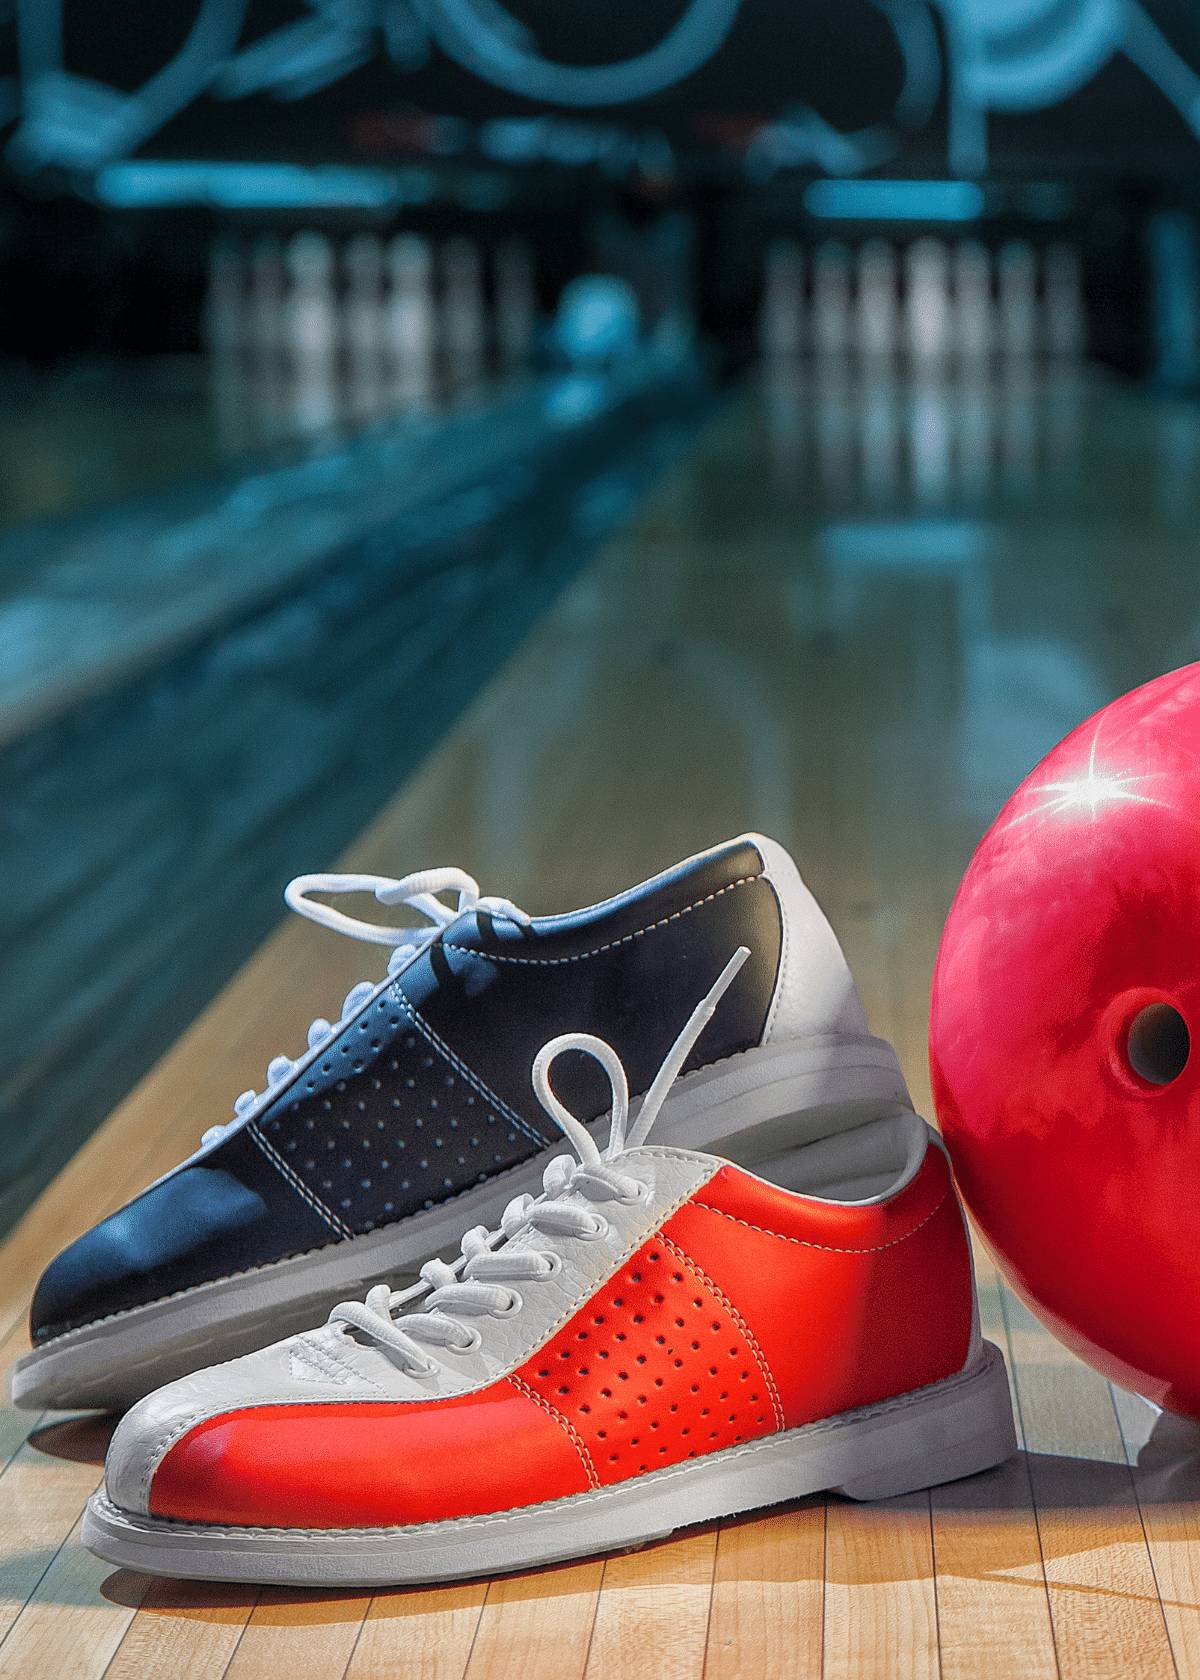 Best bowling shoes